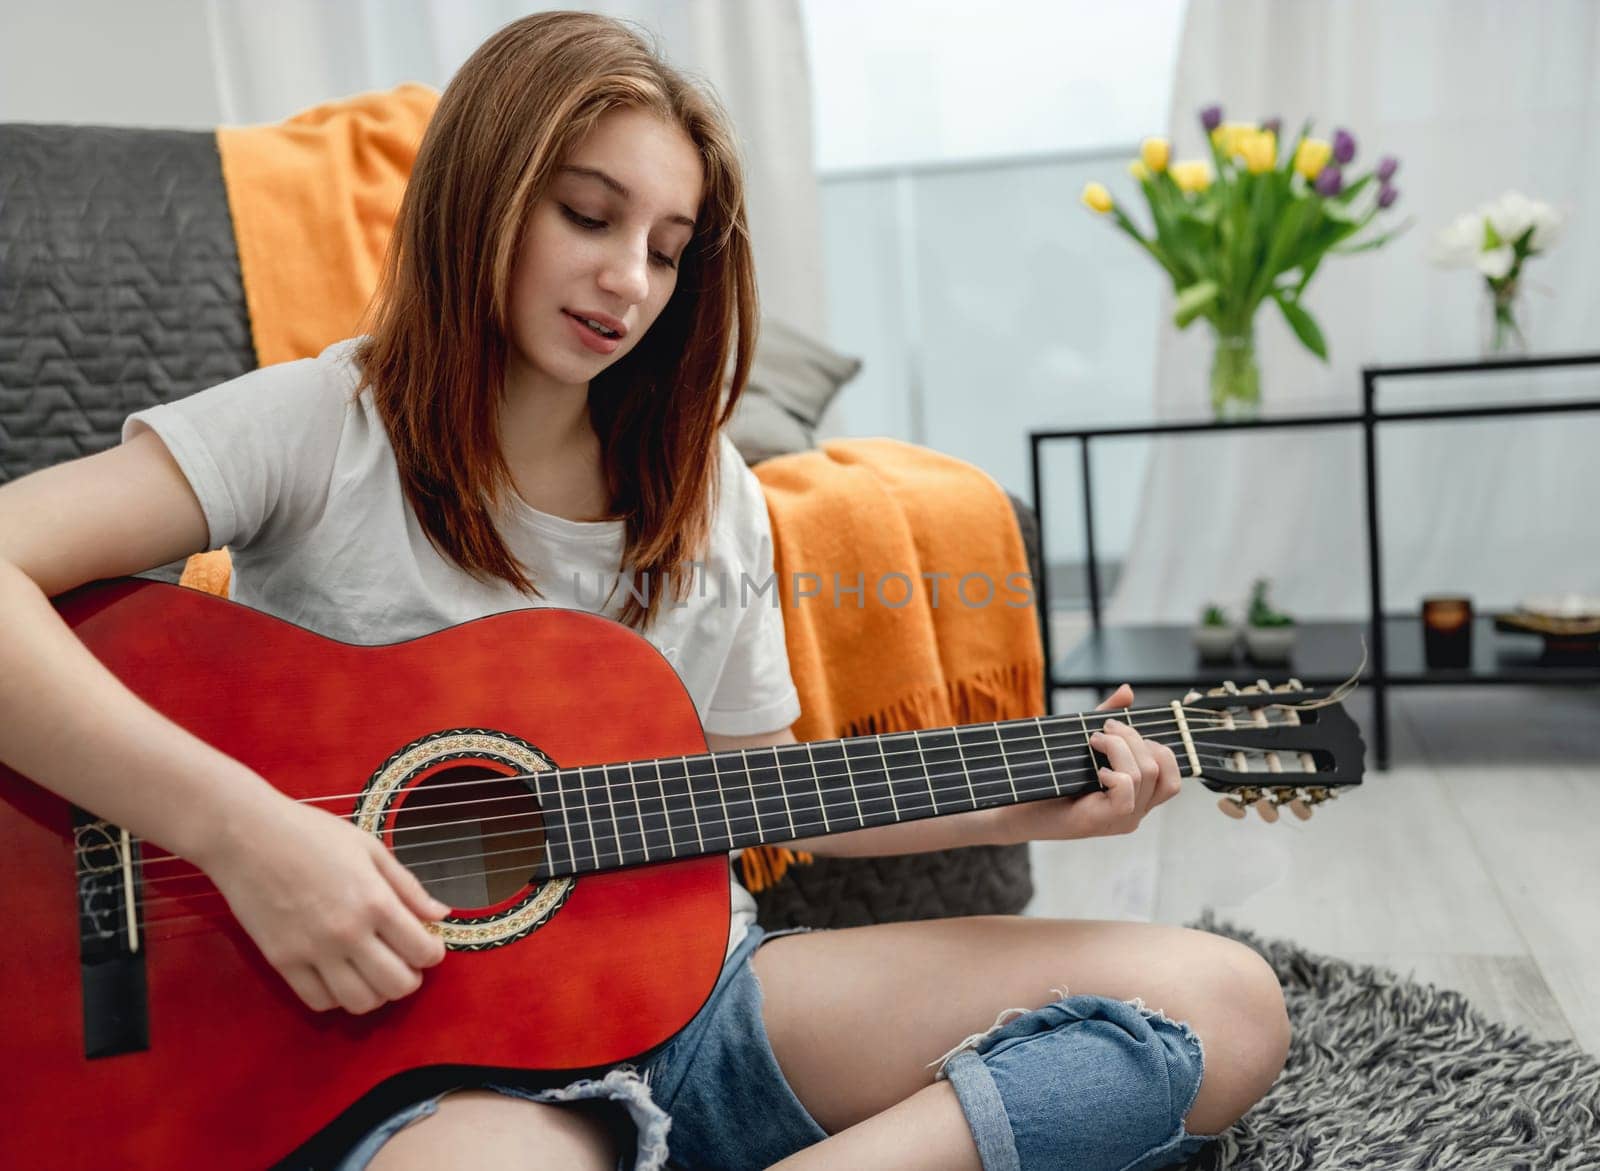 Girl teenager practicing guitar playing at home sitting on floor. Pretty guitarist with musician instrument